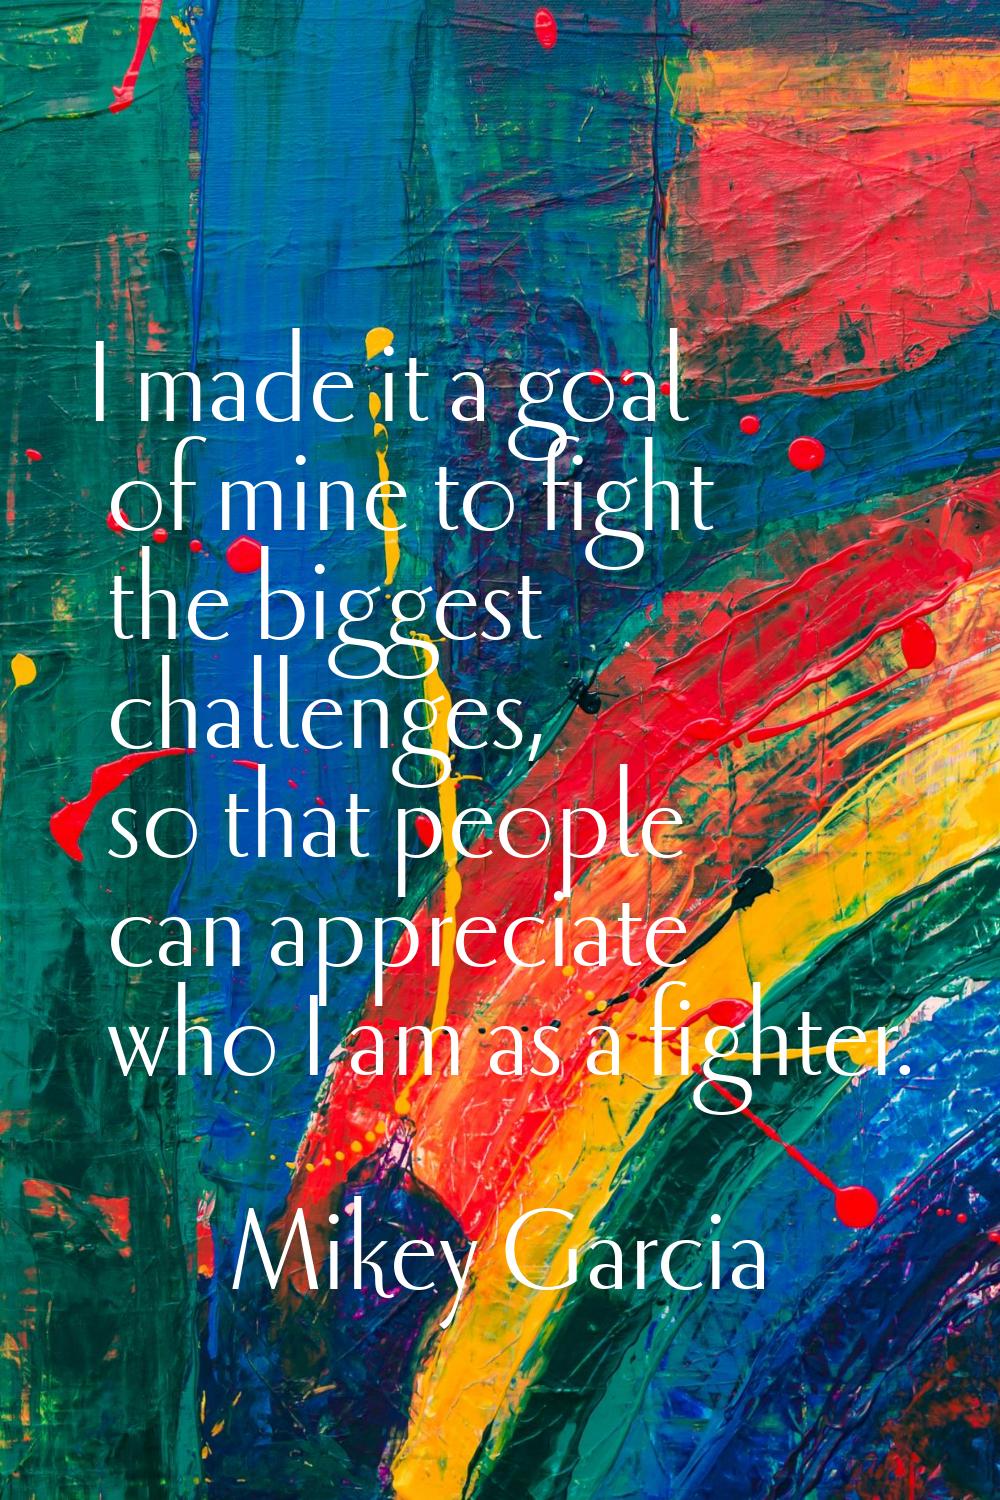 I made it a goal of mine to fight the biggest challenges, so that people can appreciate who I am as